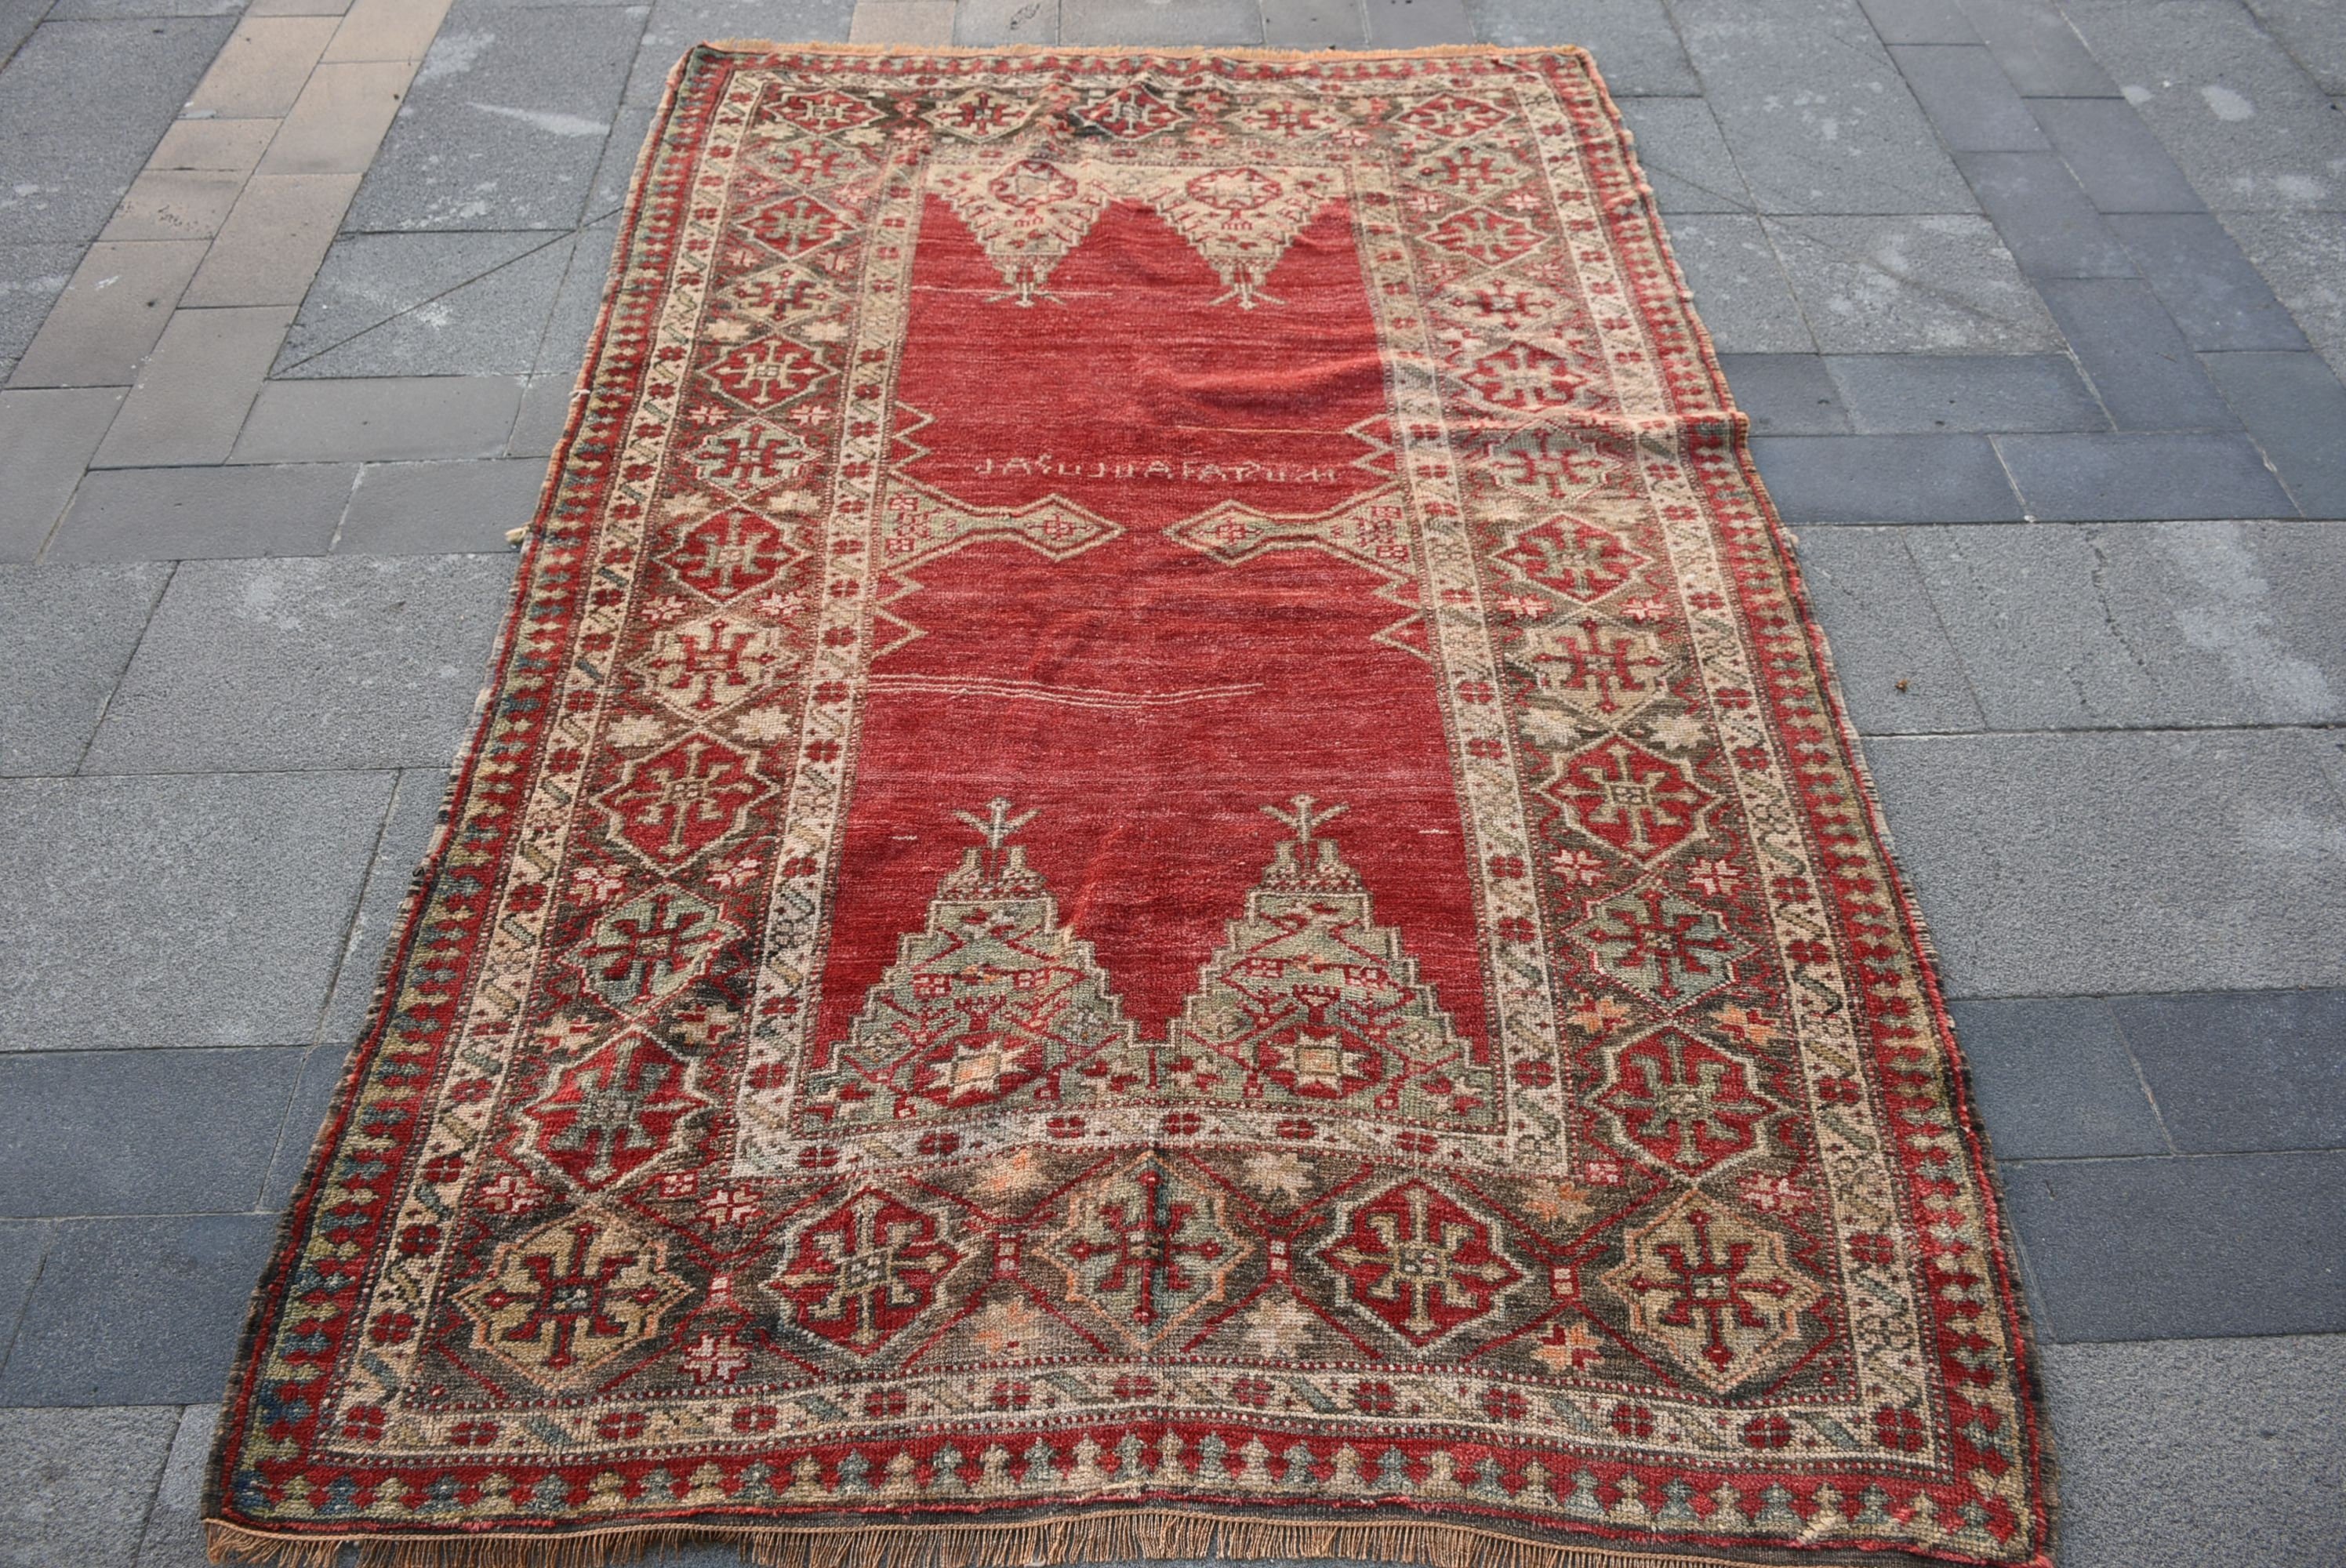 Anatolian Rug, Turkish Rugs, 4.2x6.7 ft Area Rug, Indoor Rugs, Home Decor Rug, Vintage Rug, Red Oriental Rug, Ethnic Rugs, Rugs for Kitchen